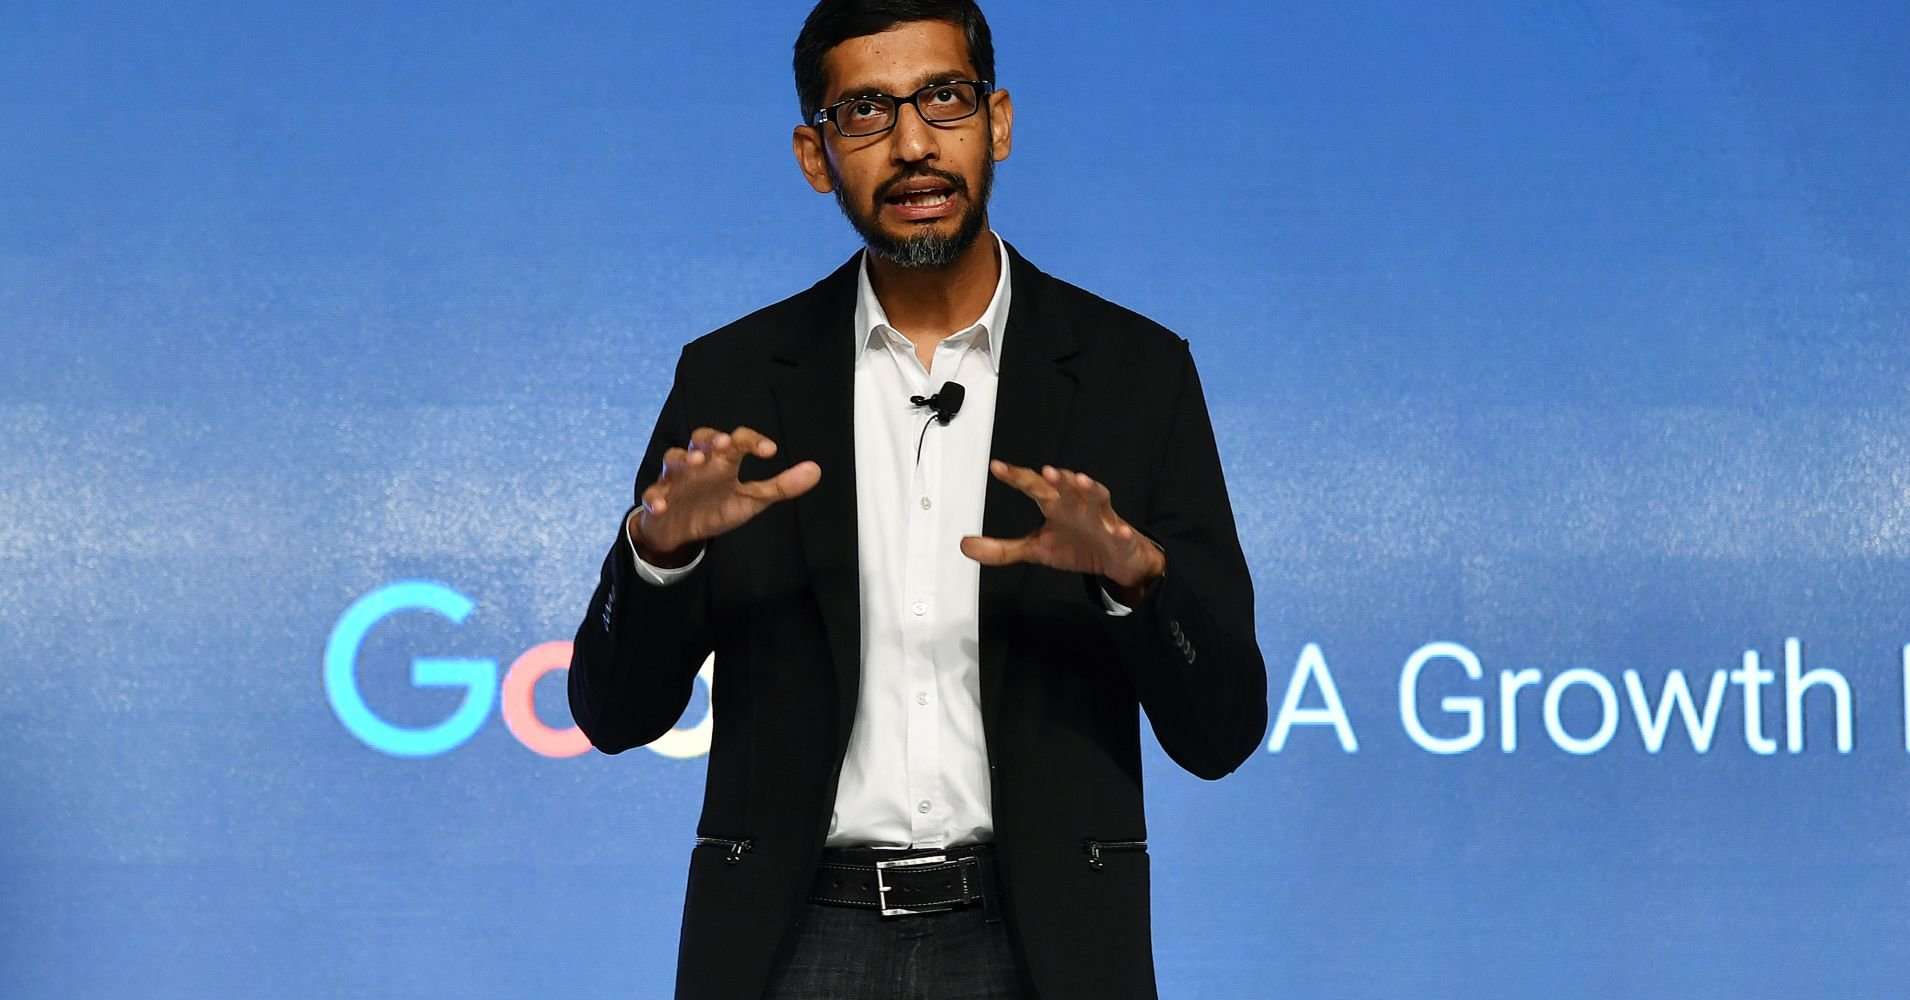 image for Google employees: We no longer believe the company places values over profits